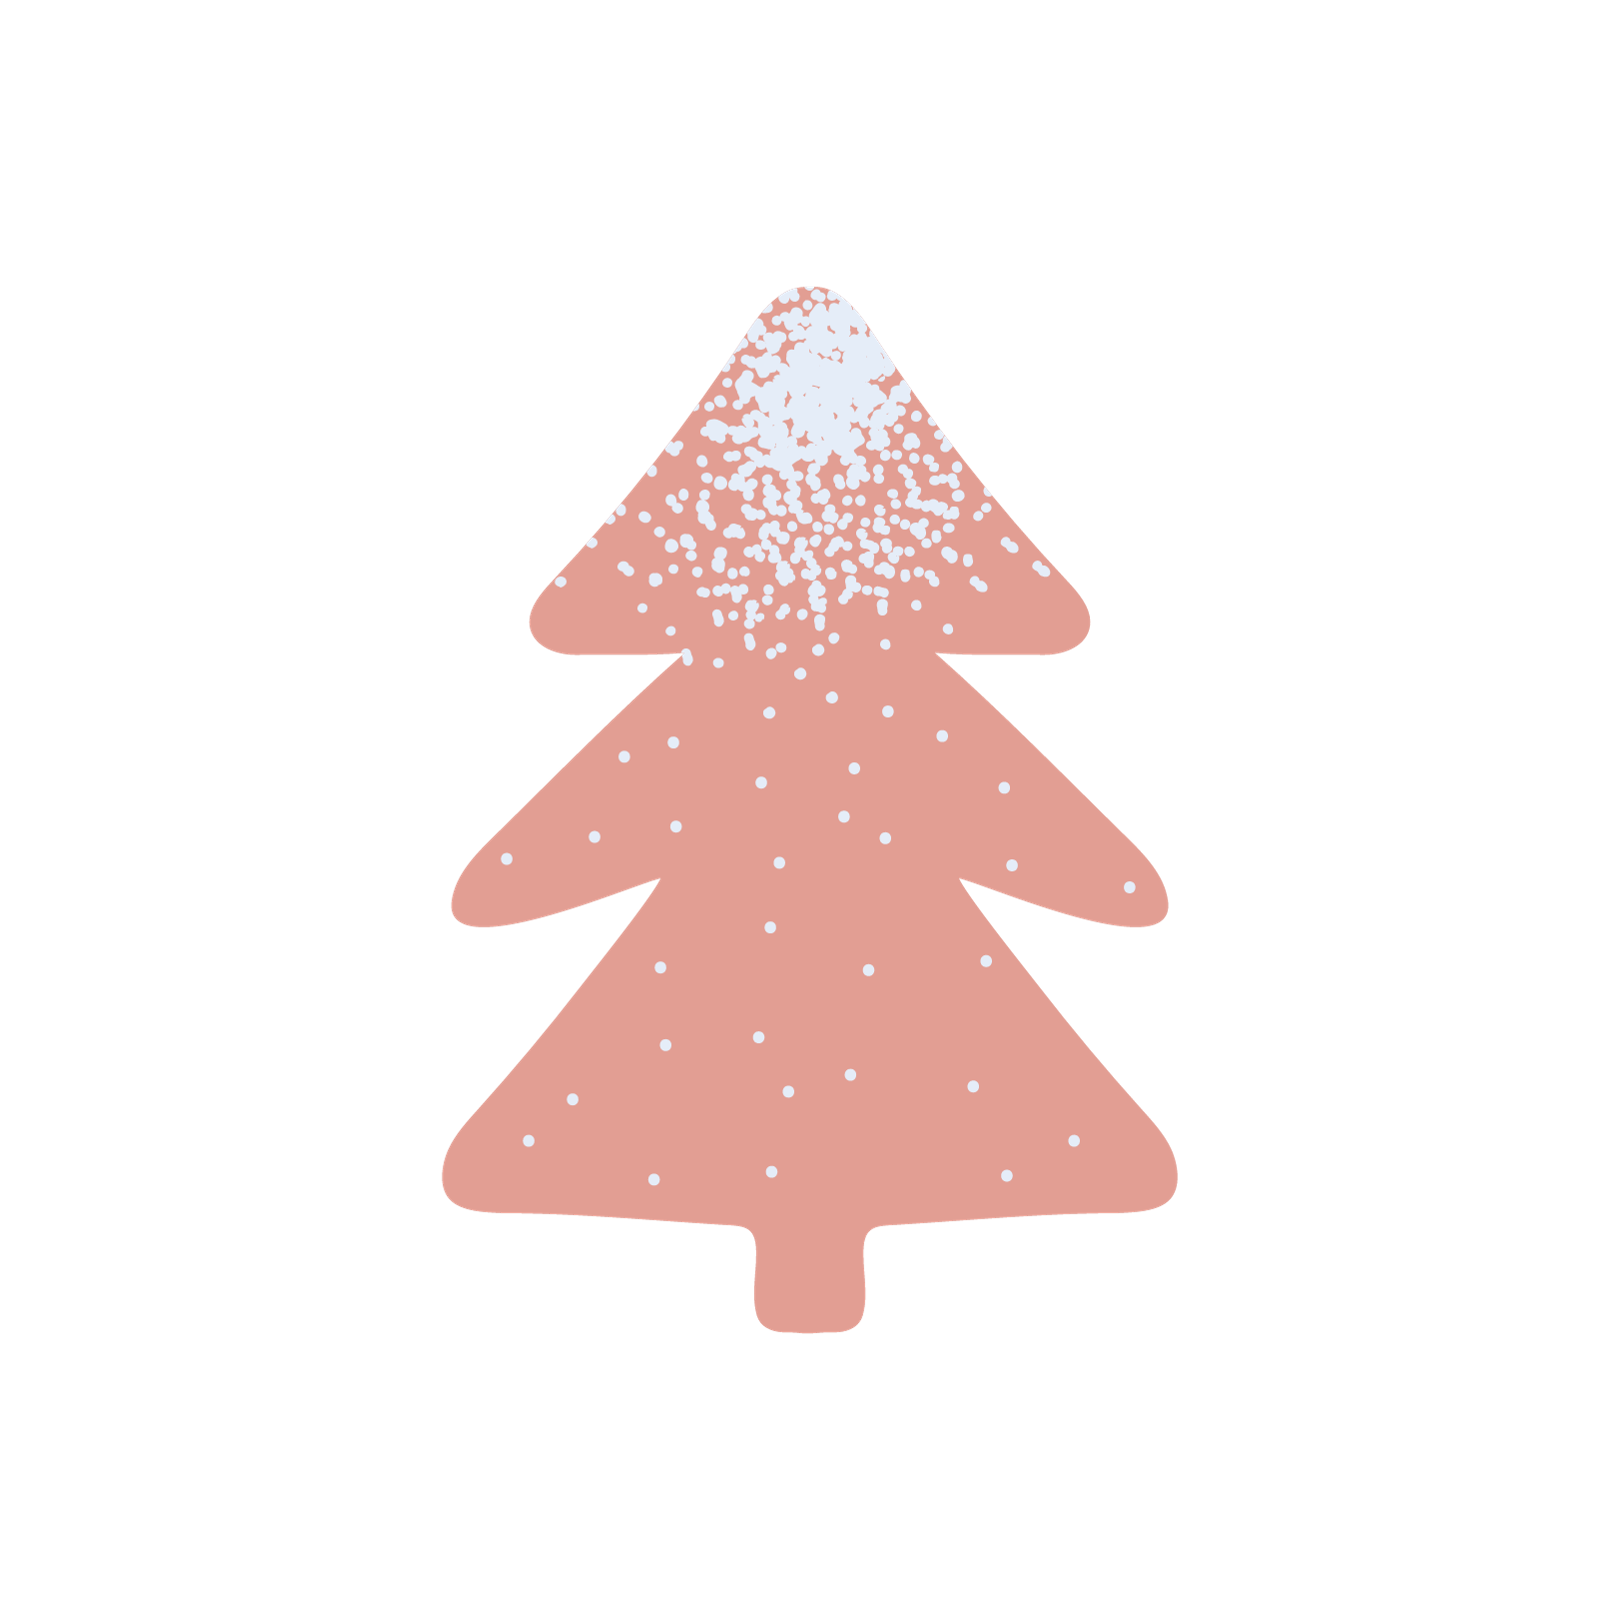 tree 2.png